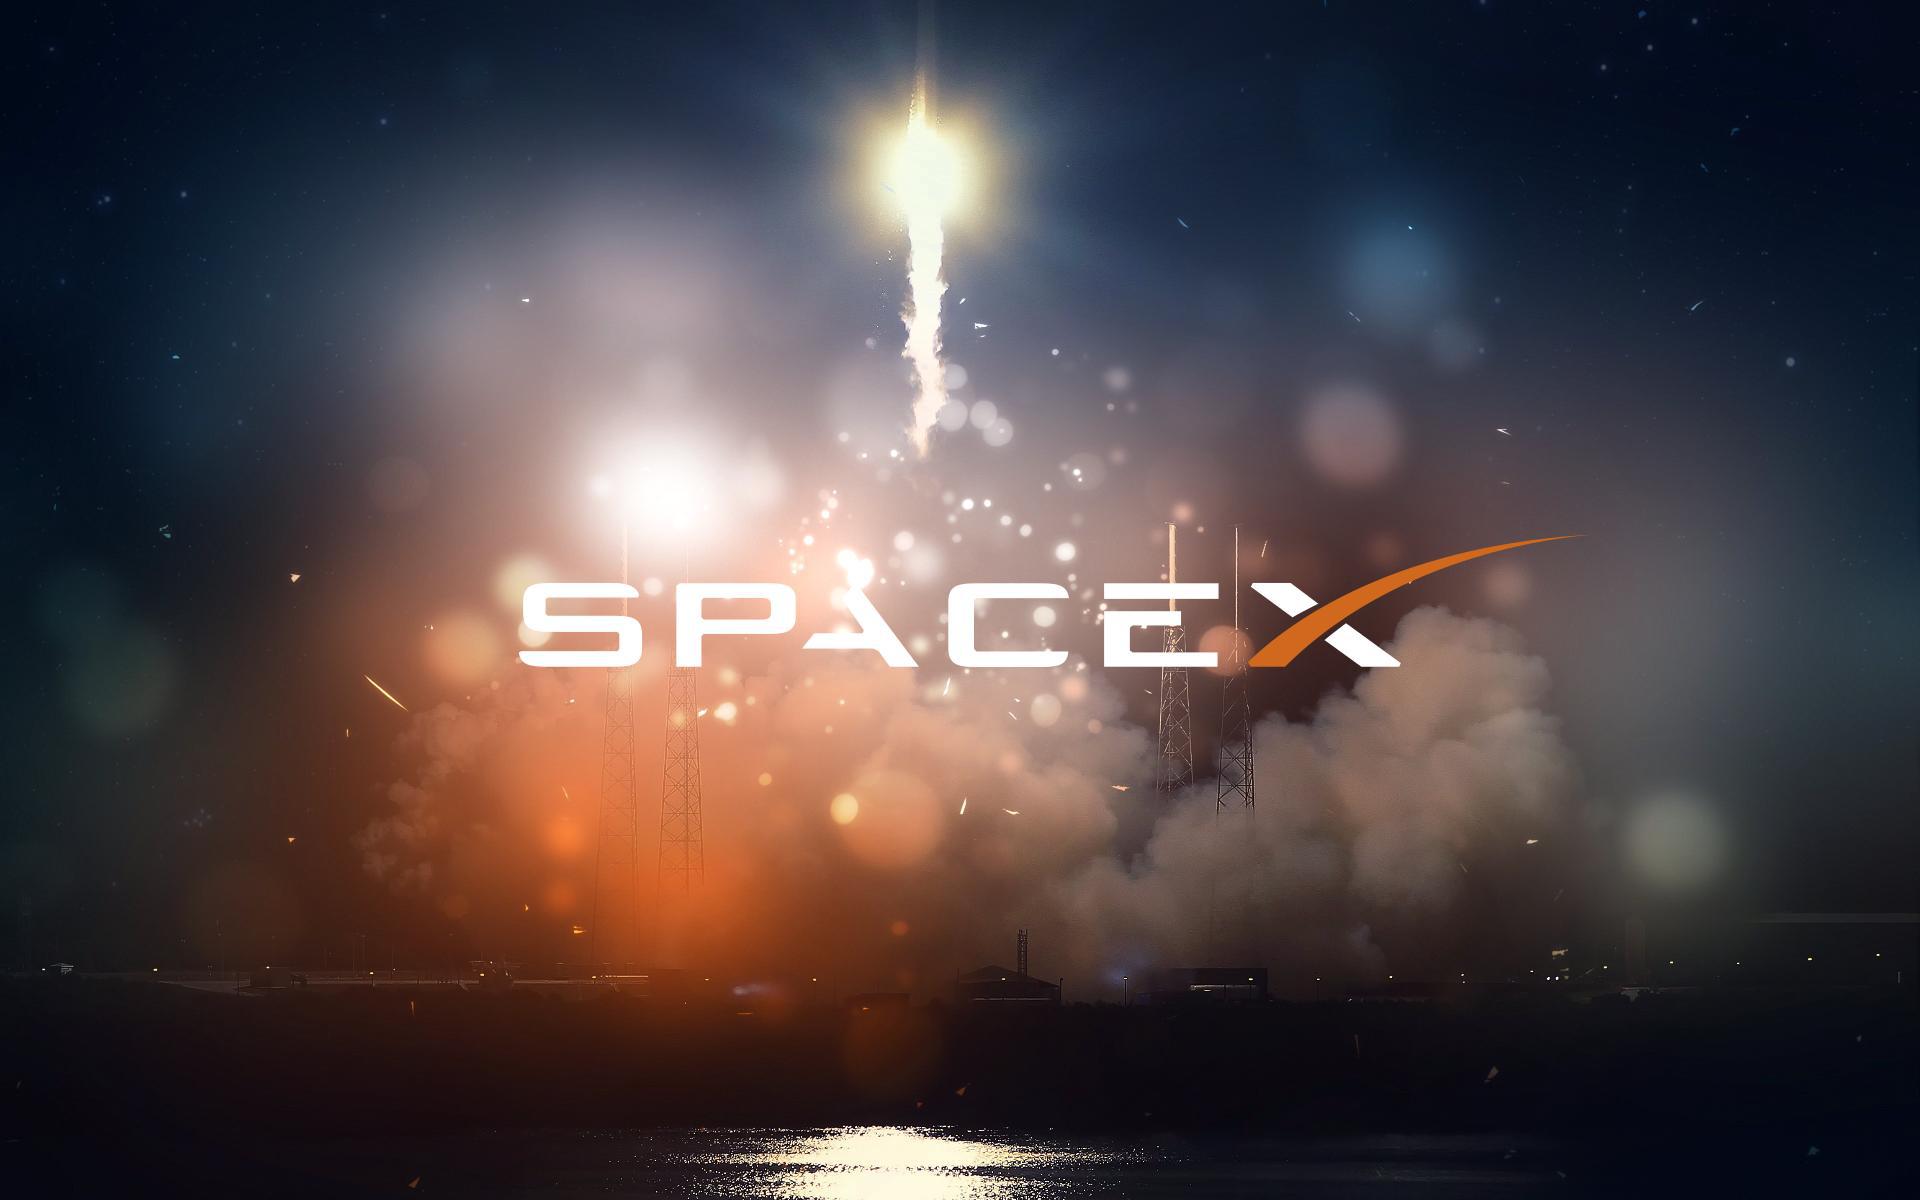 SpaceX Wallpaper Image Photo Picture Background